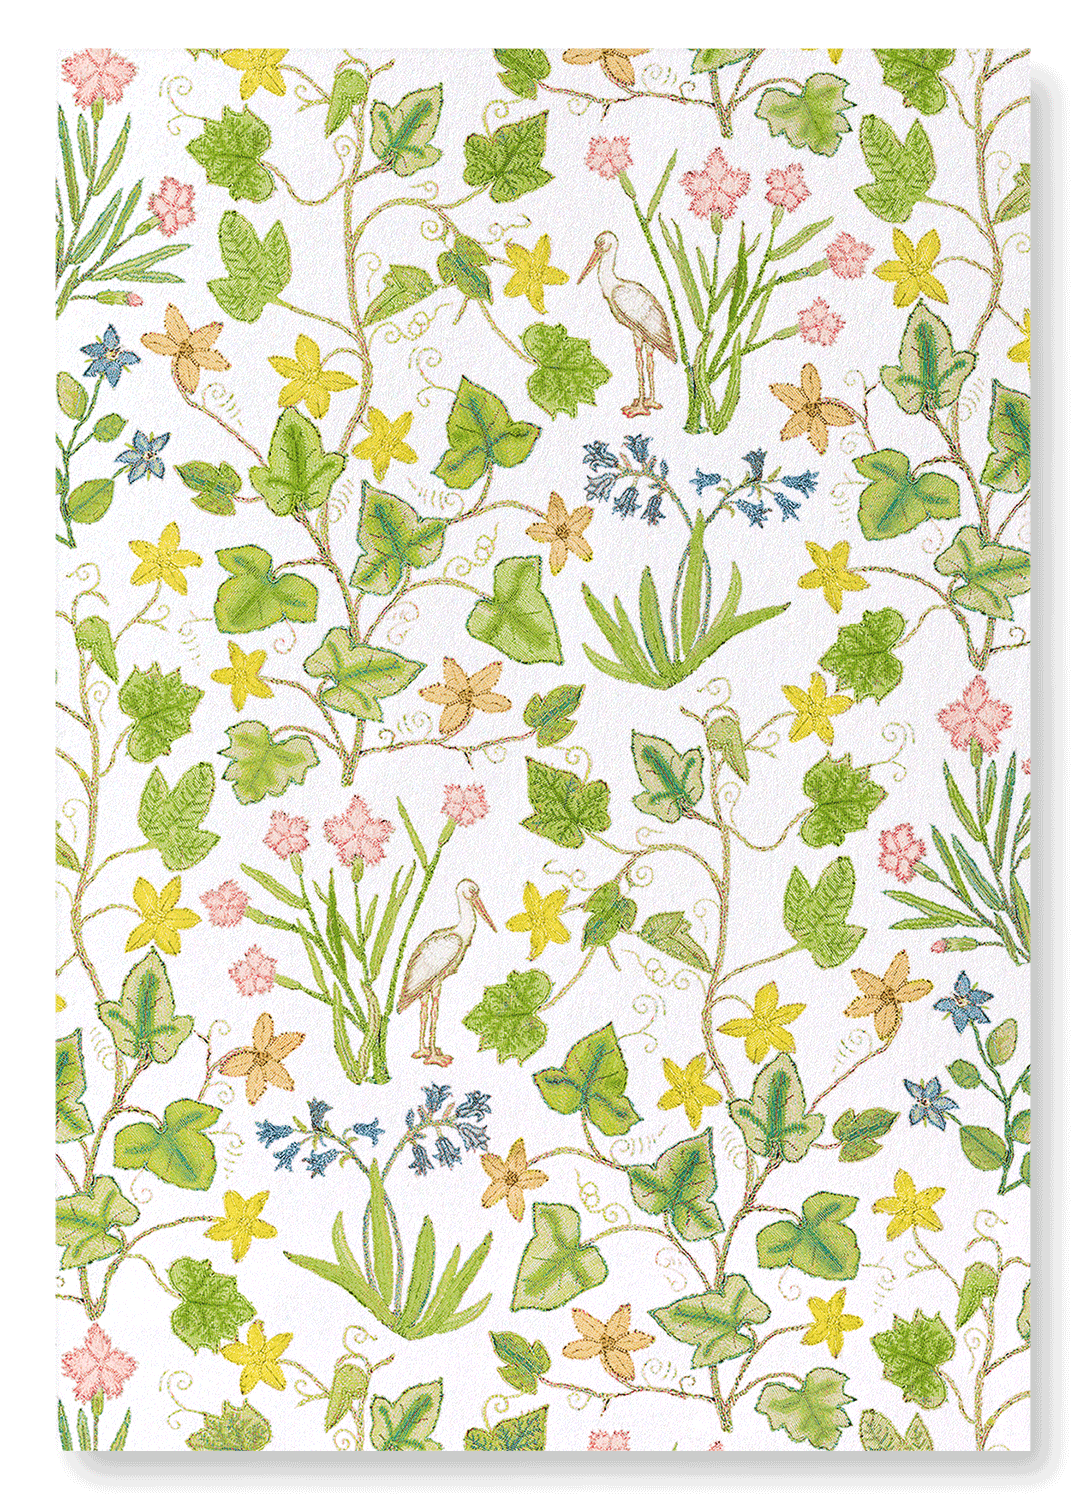 IVY AND FLOWERS ON WHITE (16TH C.): Pattern Art Print